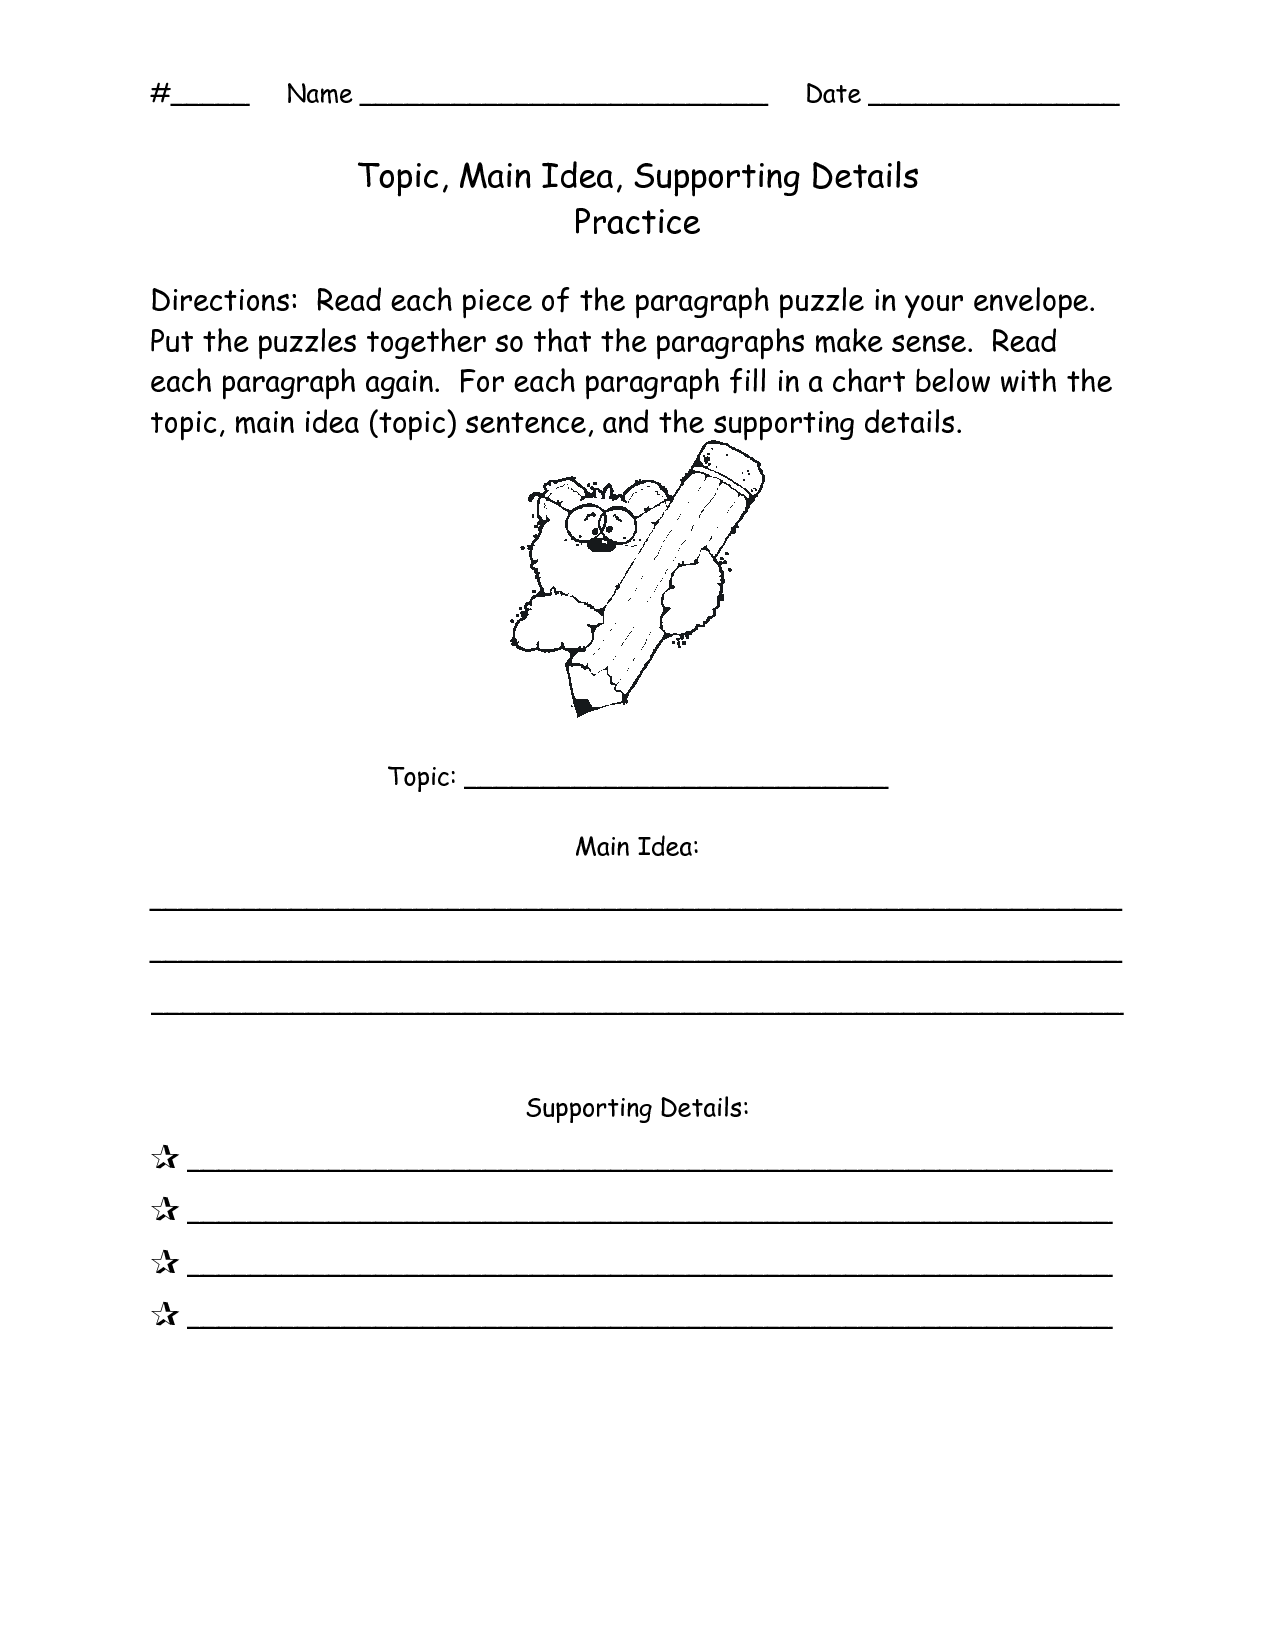 14-idea-supporting-and-main-worksheets-details-practice-worksheeto